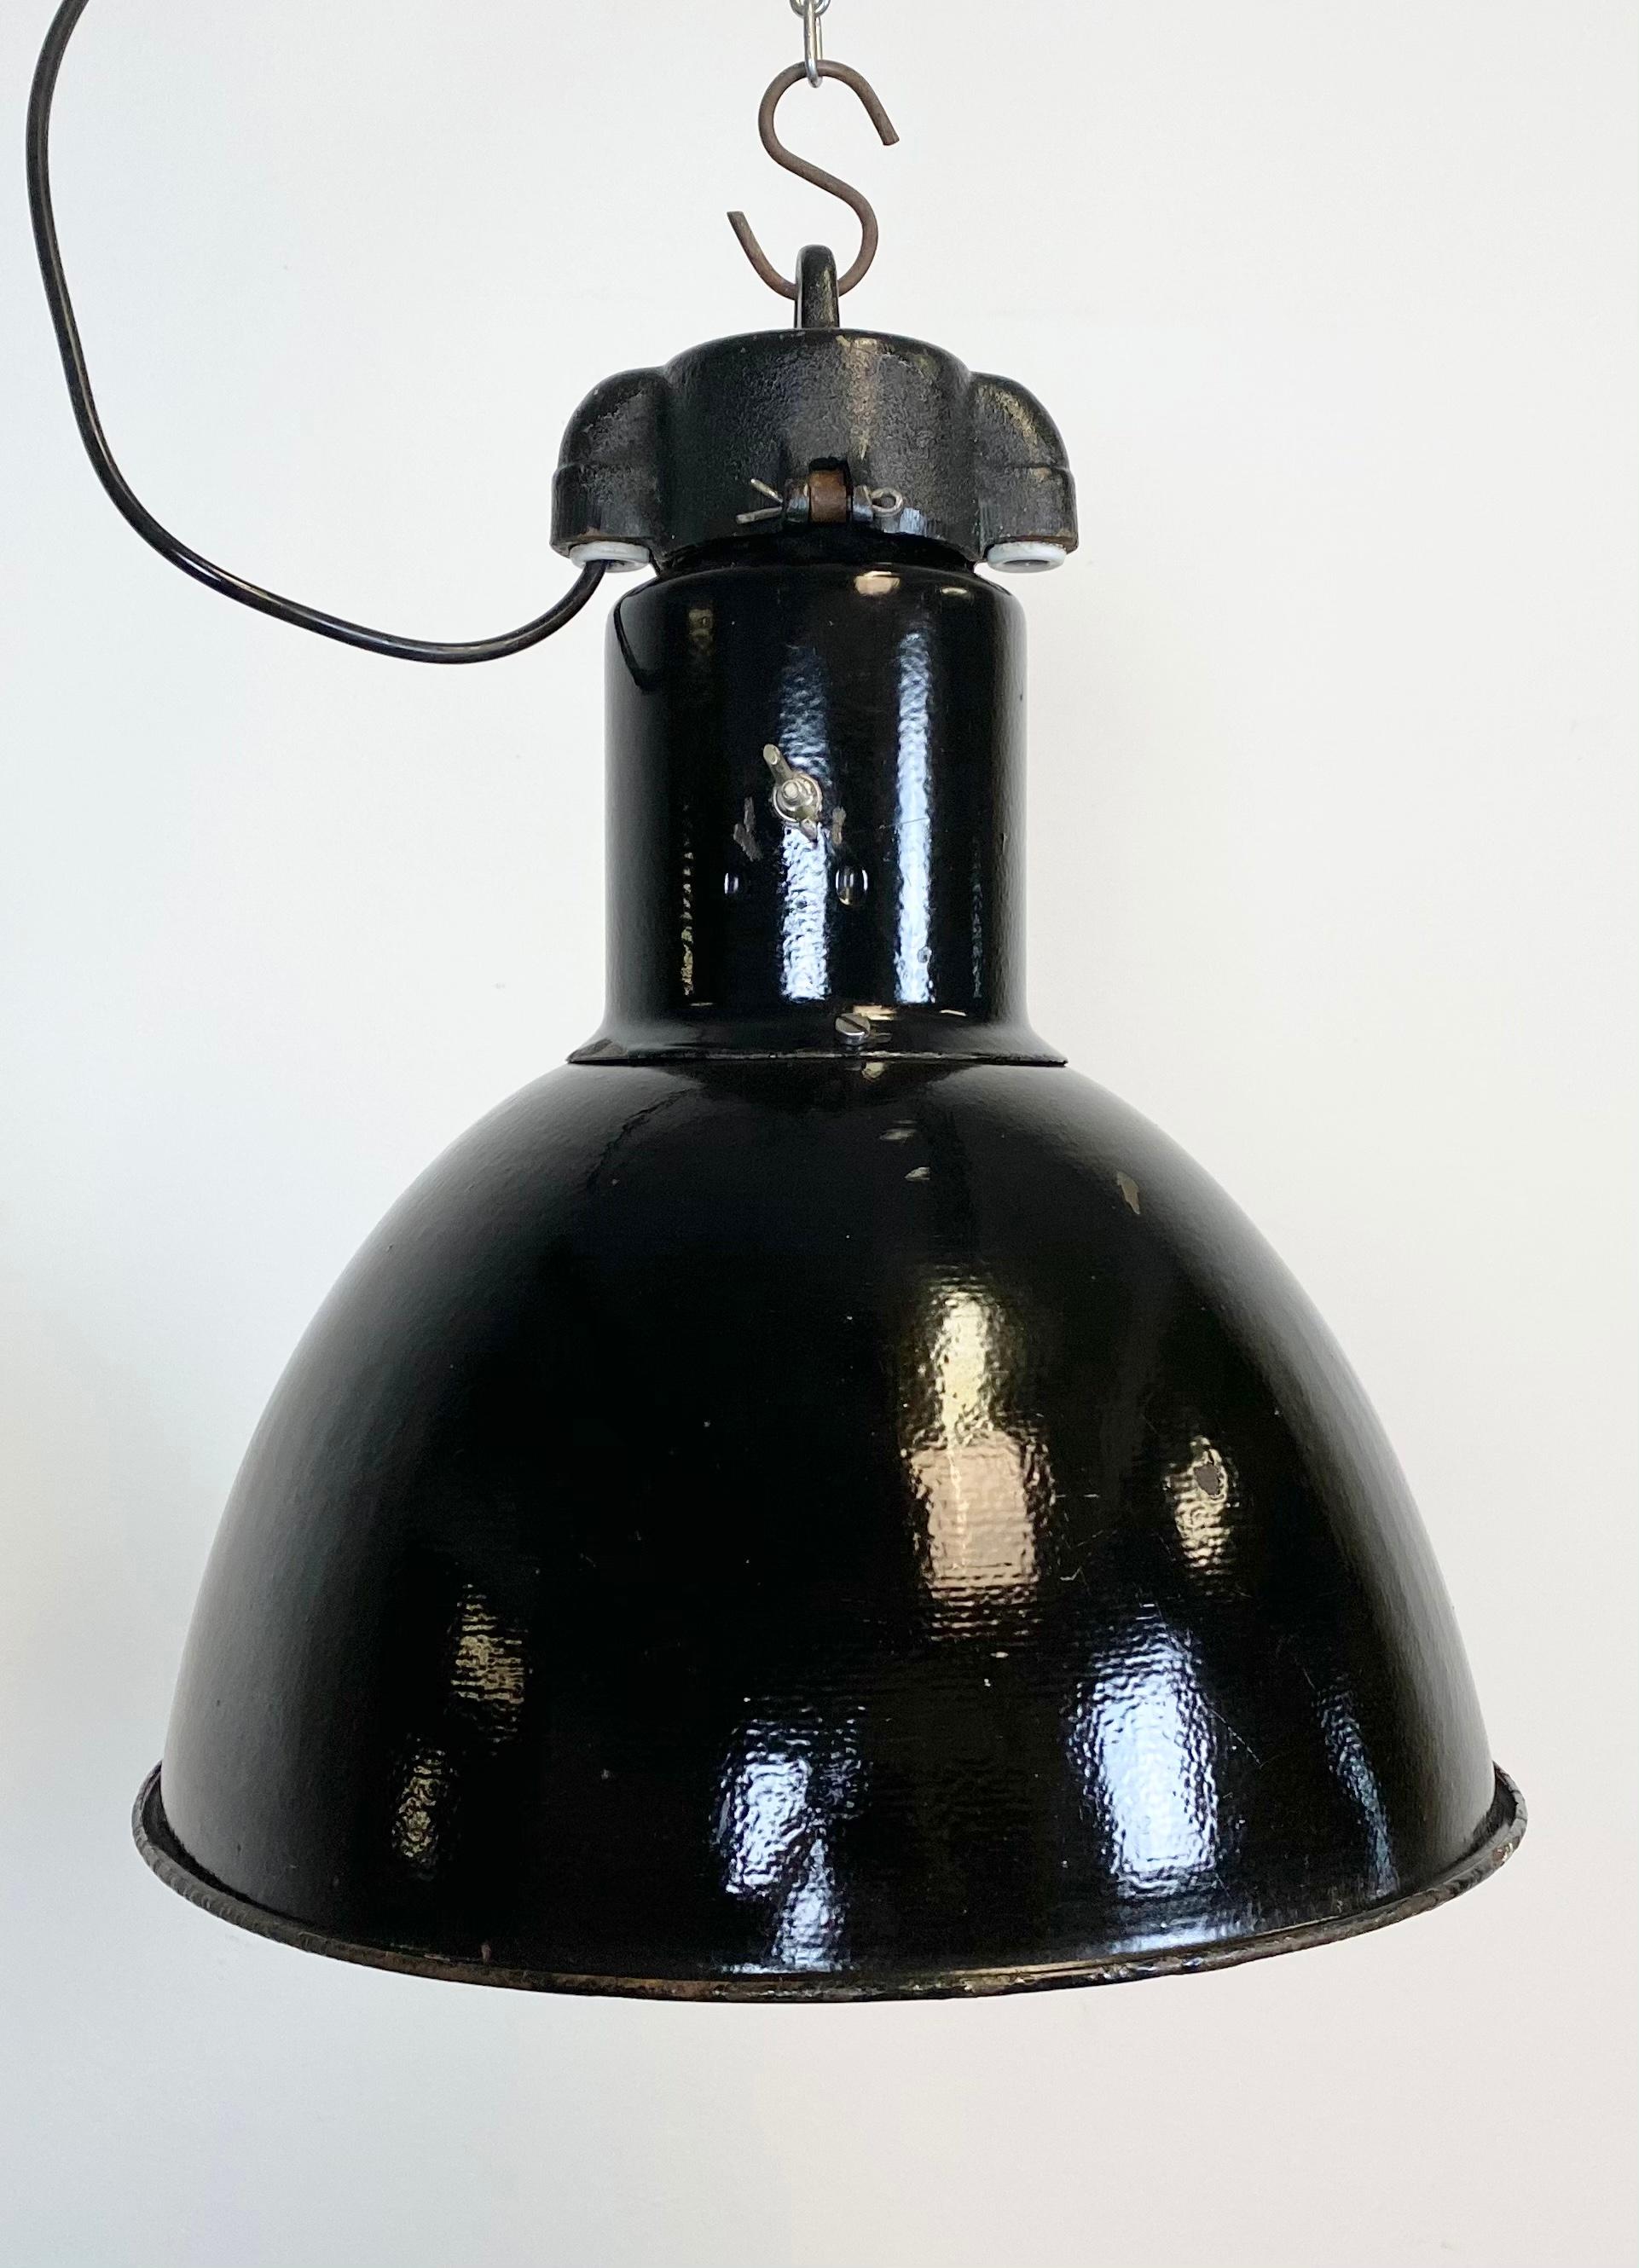 - Black enamel pendant lamp 
- Made by Elektrosvit in former Czechoslovakia 
- Bauhaus style 
- Designed in the 1930s 
- White enamel interior 
- Cast iron top 
- New socket for E 27 ligtbulbs and wire.